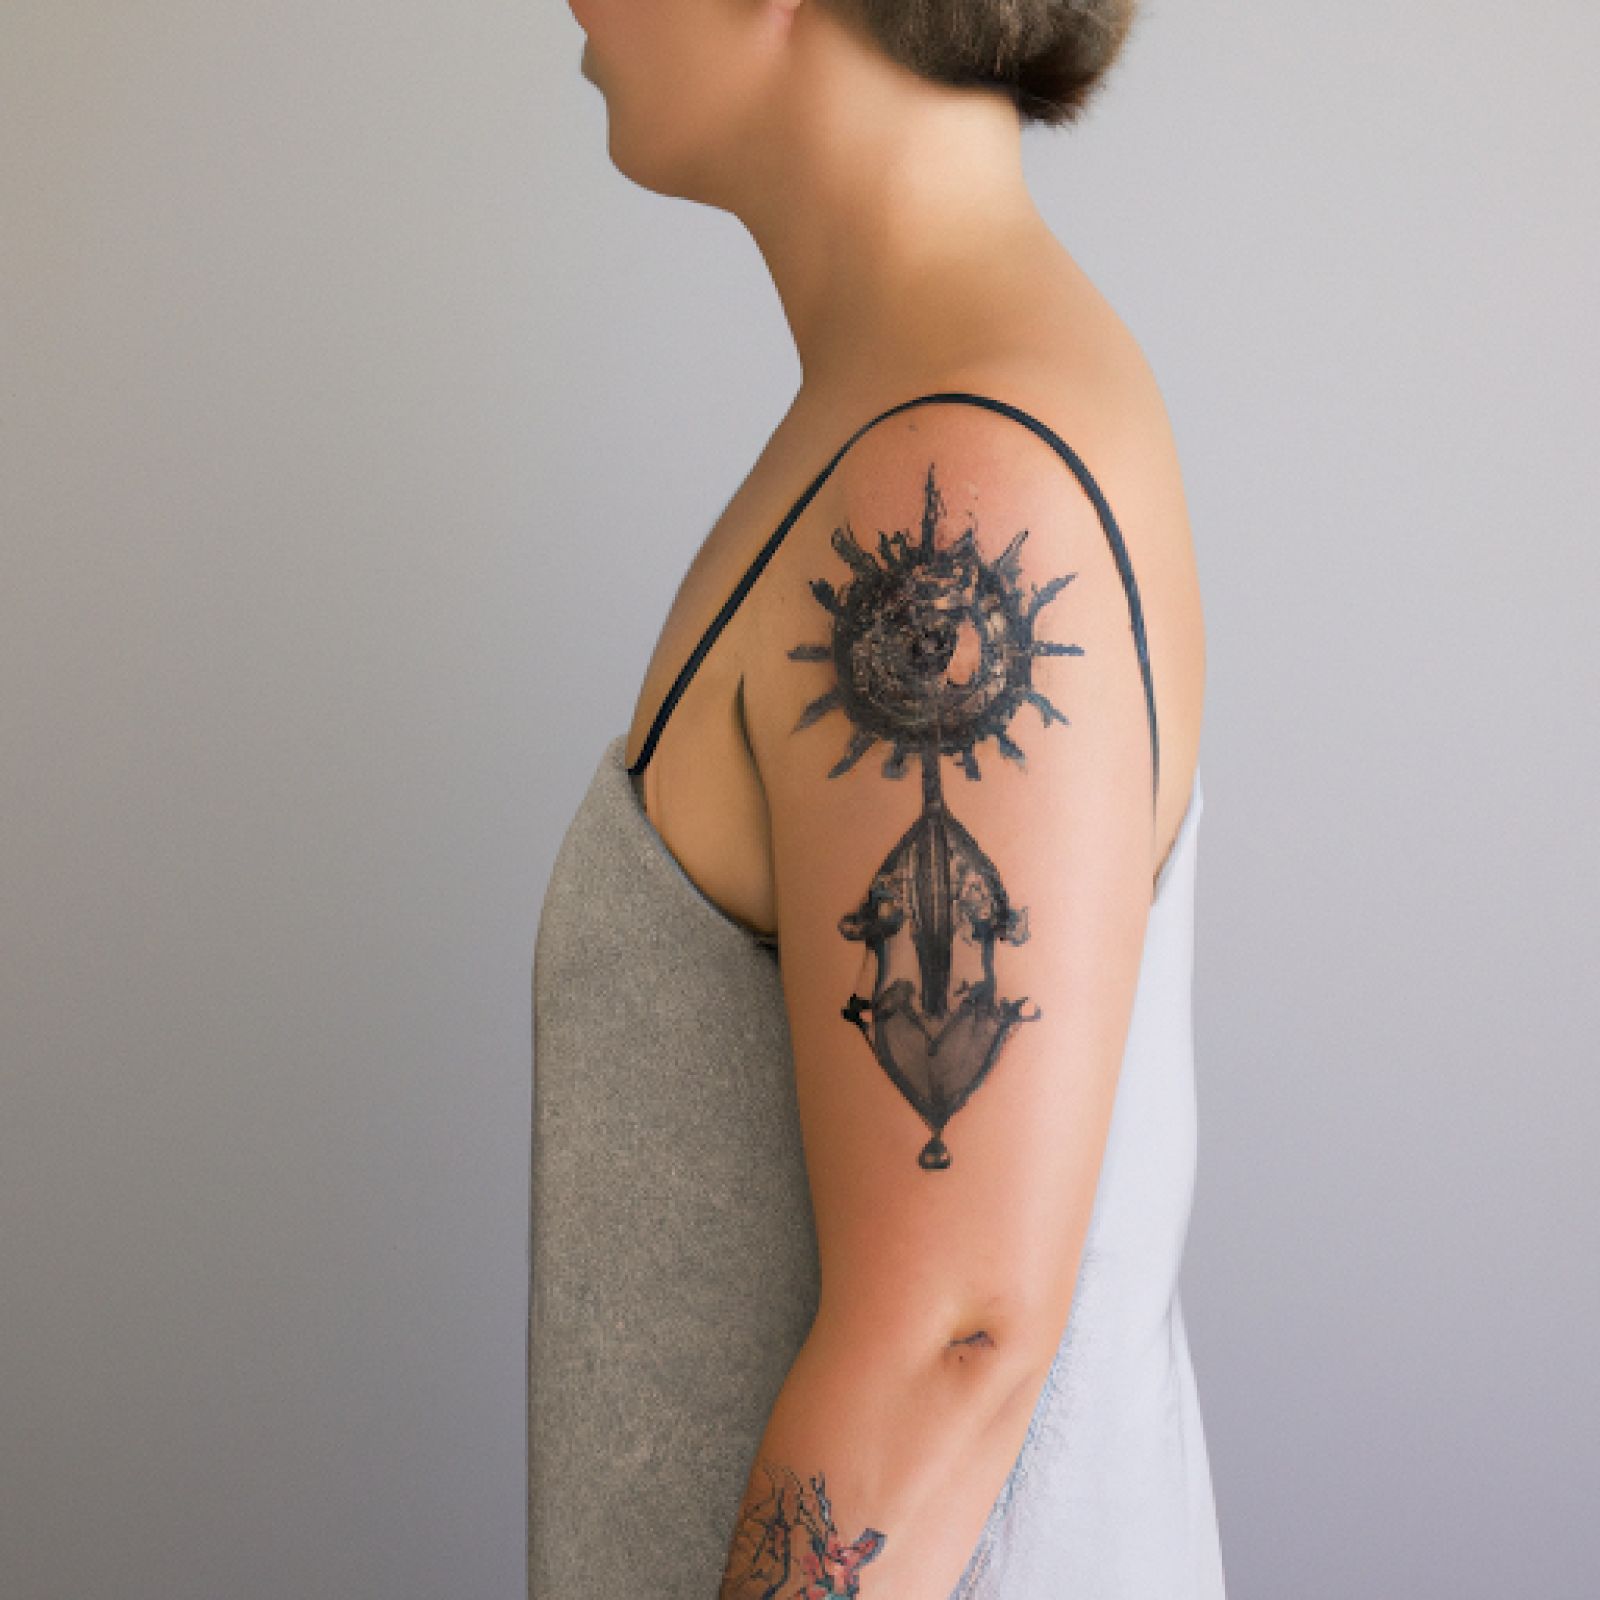 Compass tattoo on arm for women